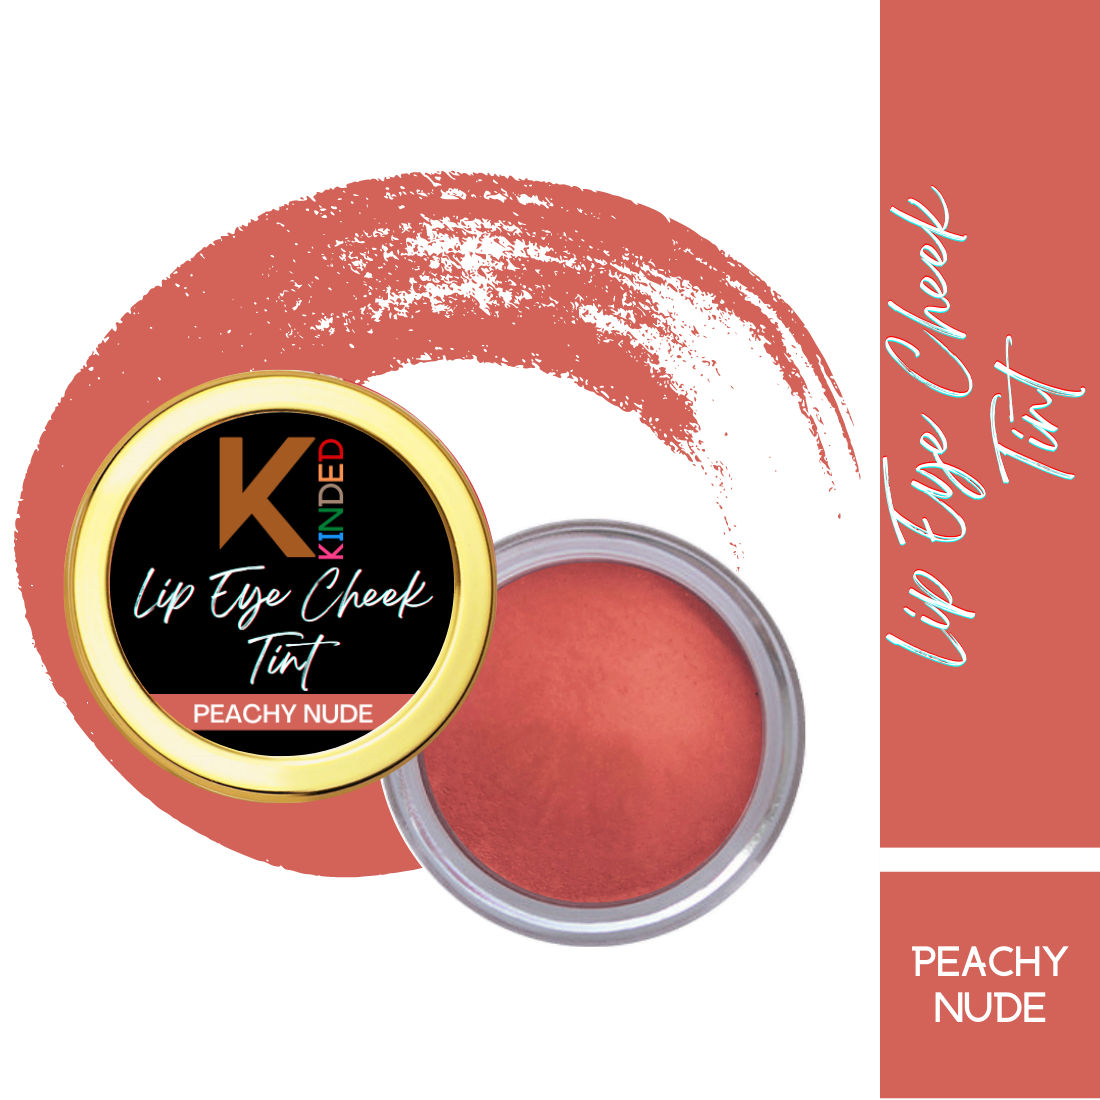 Buy KINDED Lip Eye and Cheek Tint for Women Girls Pigmented Lip Colour Lipstick Tint Balm Eyeshadow Blush with Natural Ingredients Longlasting Moisturizing Nourishing (Creamy Matte Finish, Peachy Nude) - Purplle